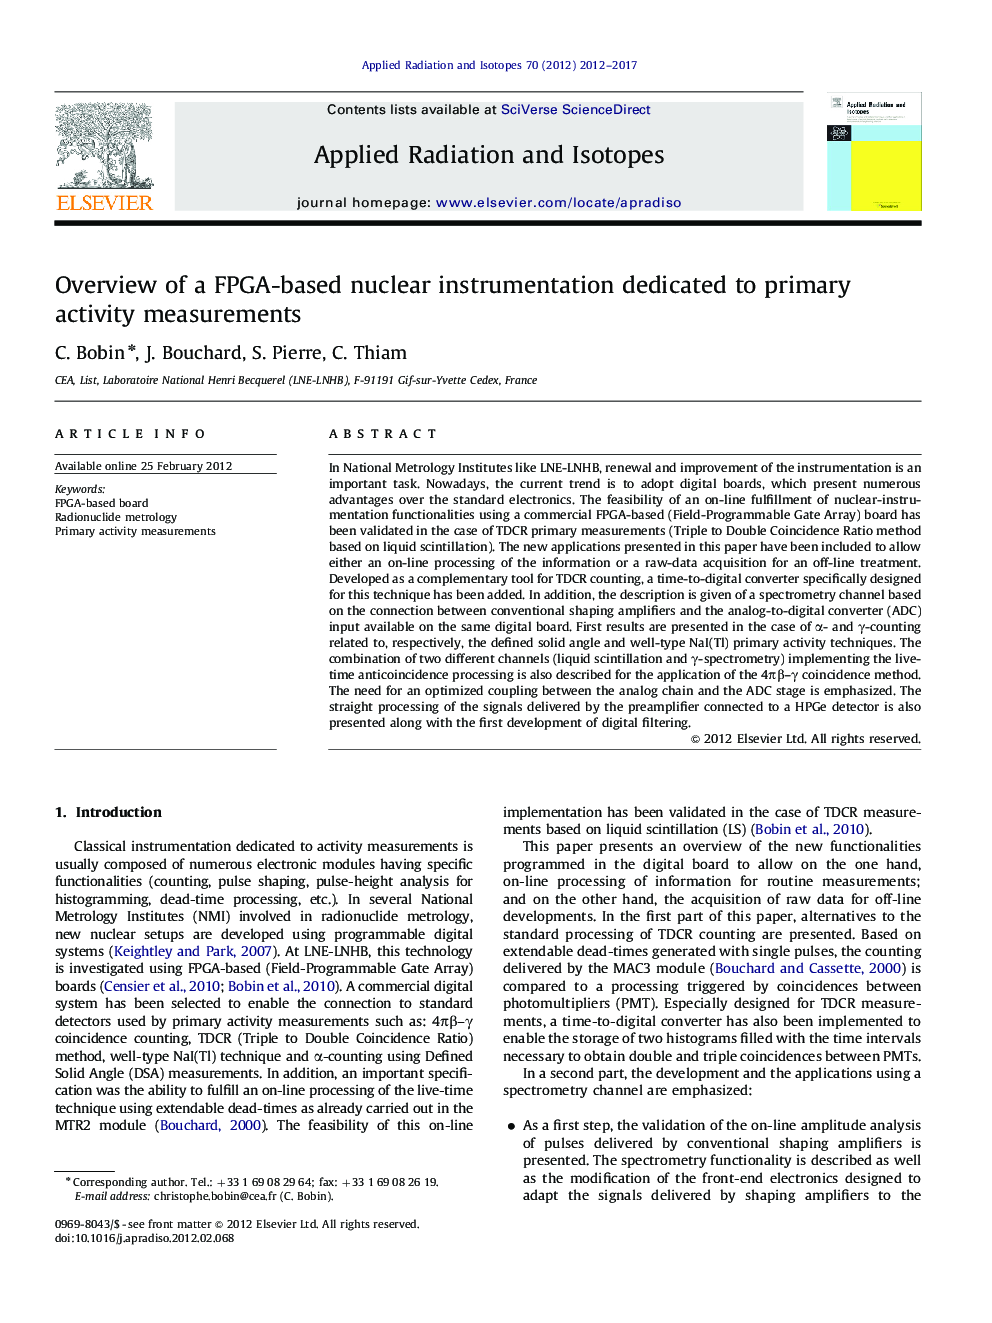 Overview of a FPGA-based nuclear instrumentation dedicated to primary activity measurements